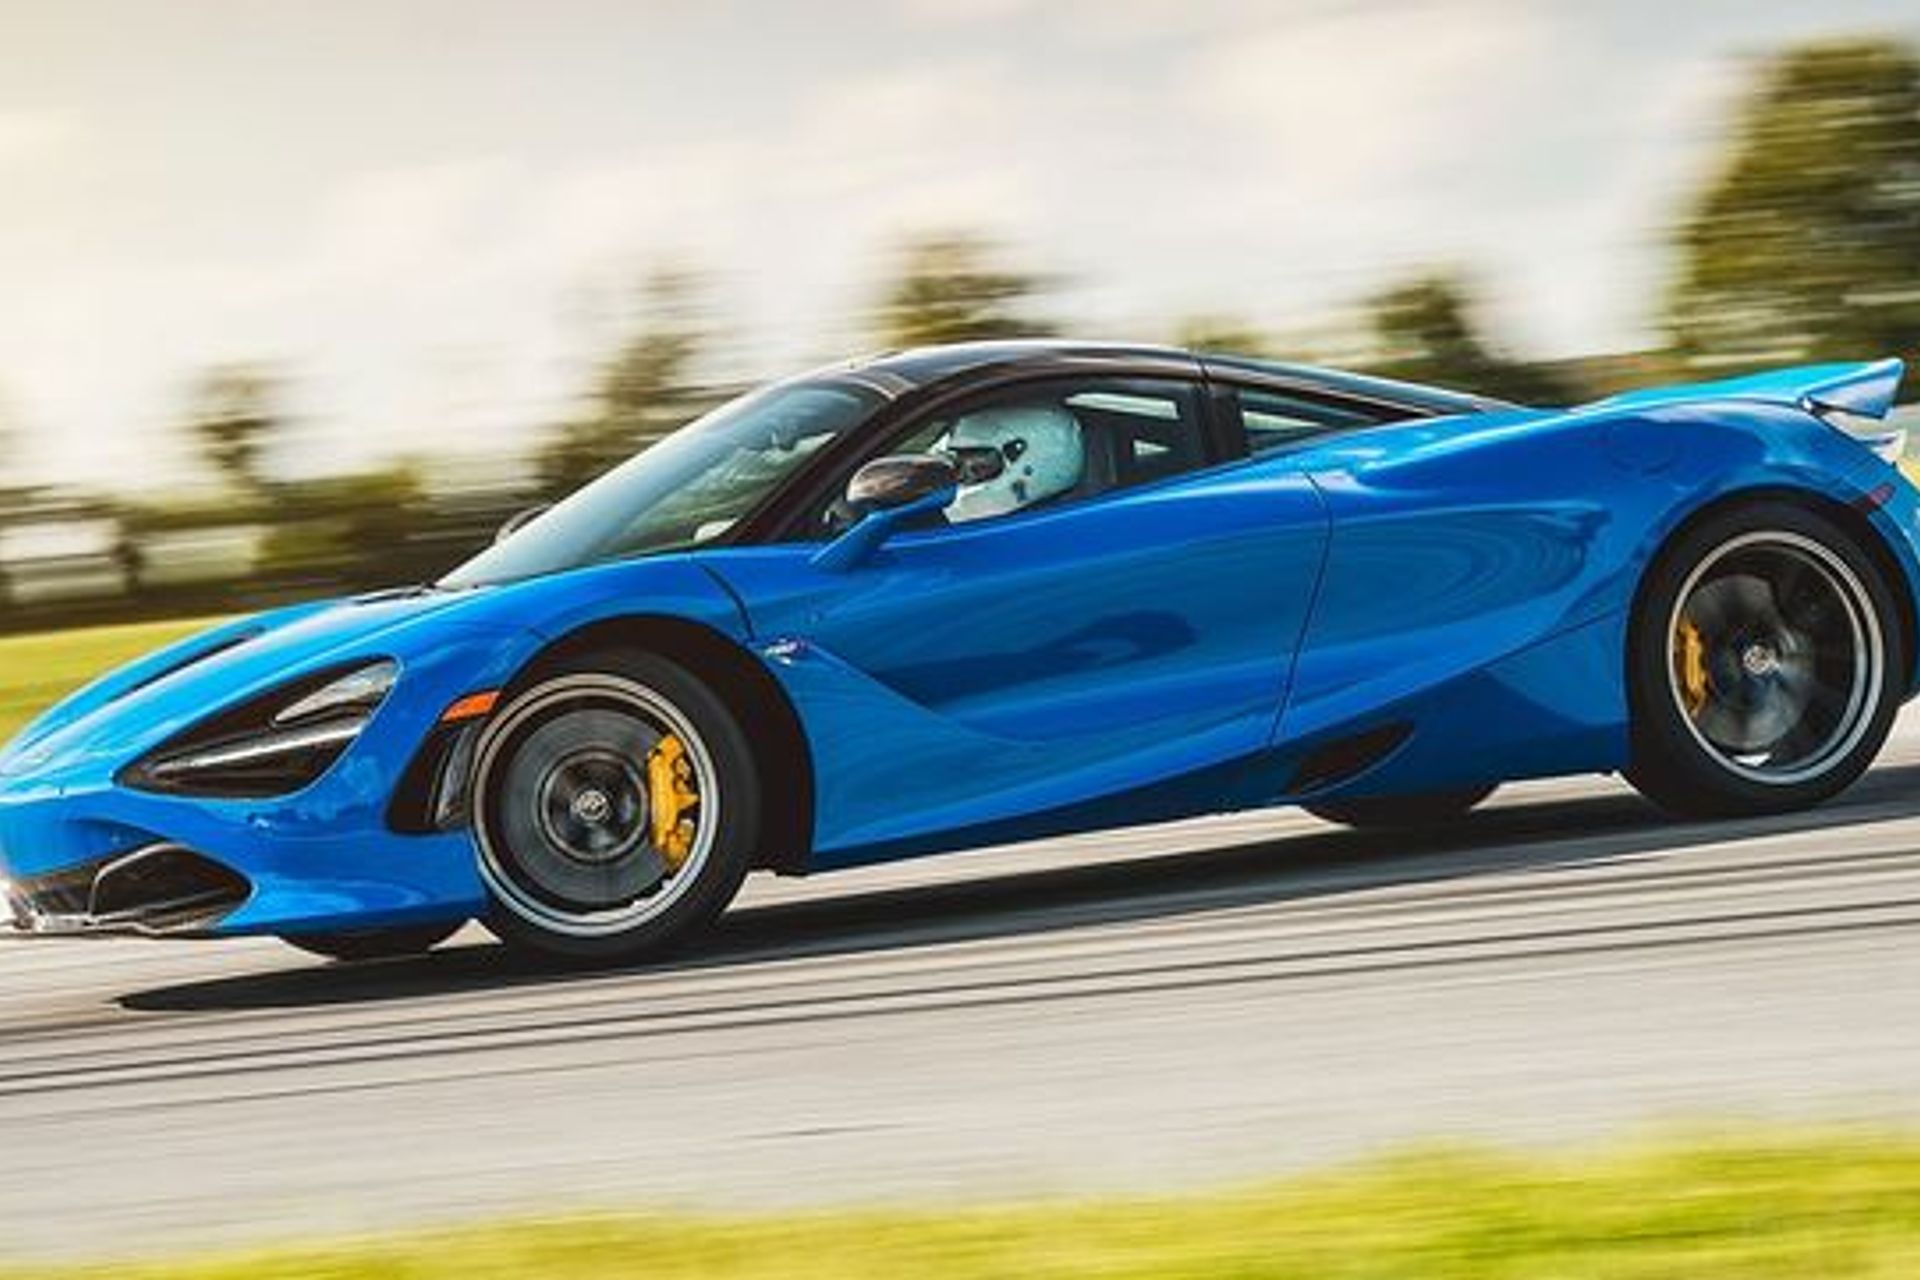 McLaren 720S replacement called 750S with 740 bhp debuts in April - report